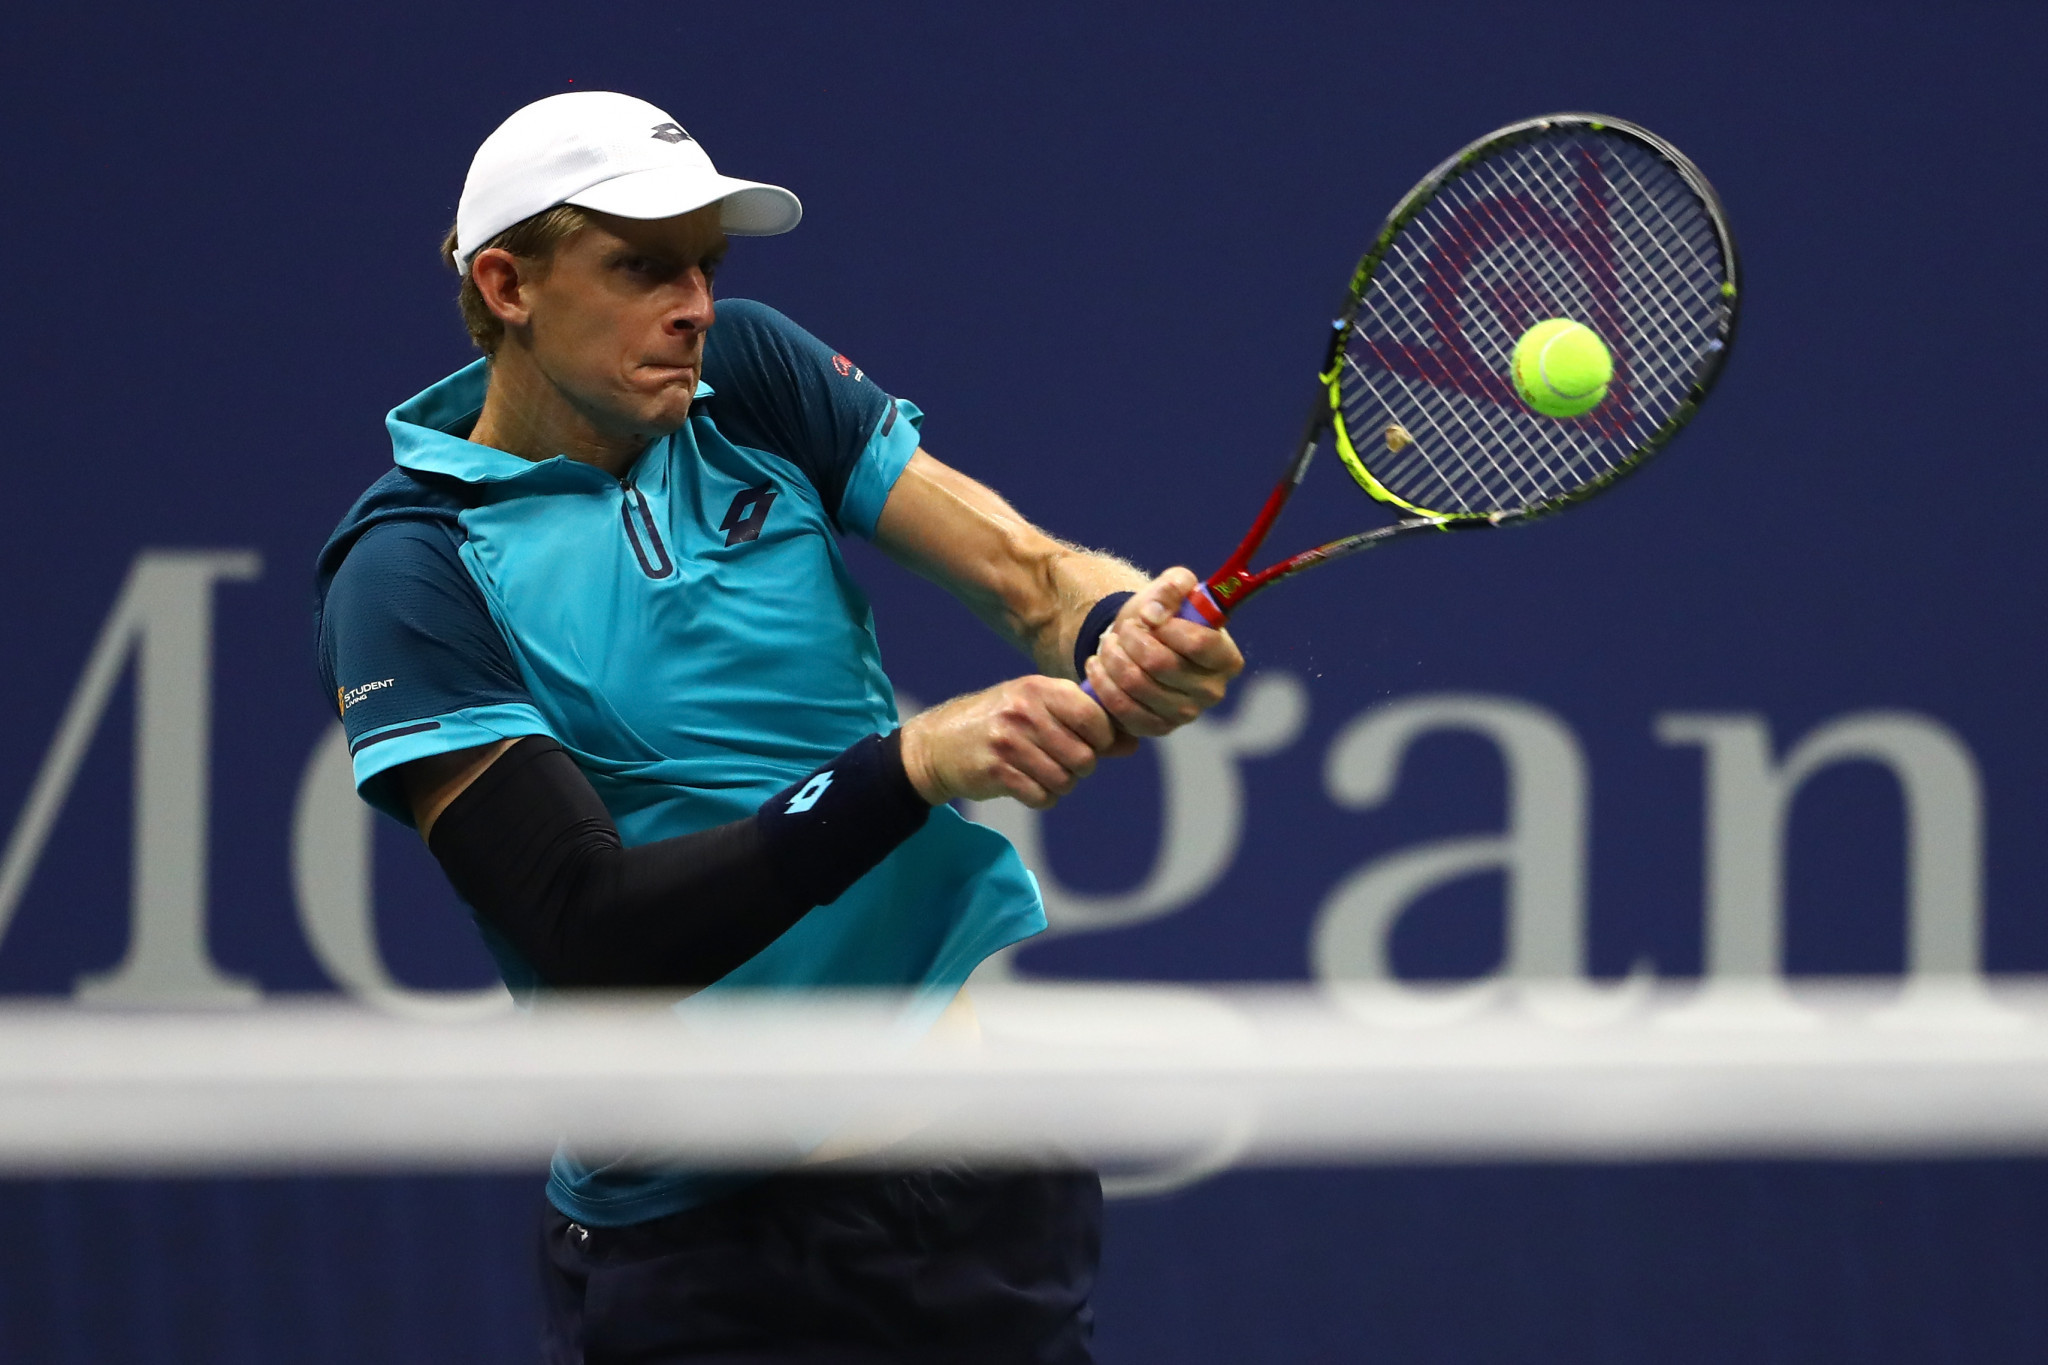 Kevin Anderson advanced to his first Grand Slam semi-final by beating Sam Querrey ©Getty Images 